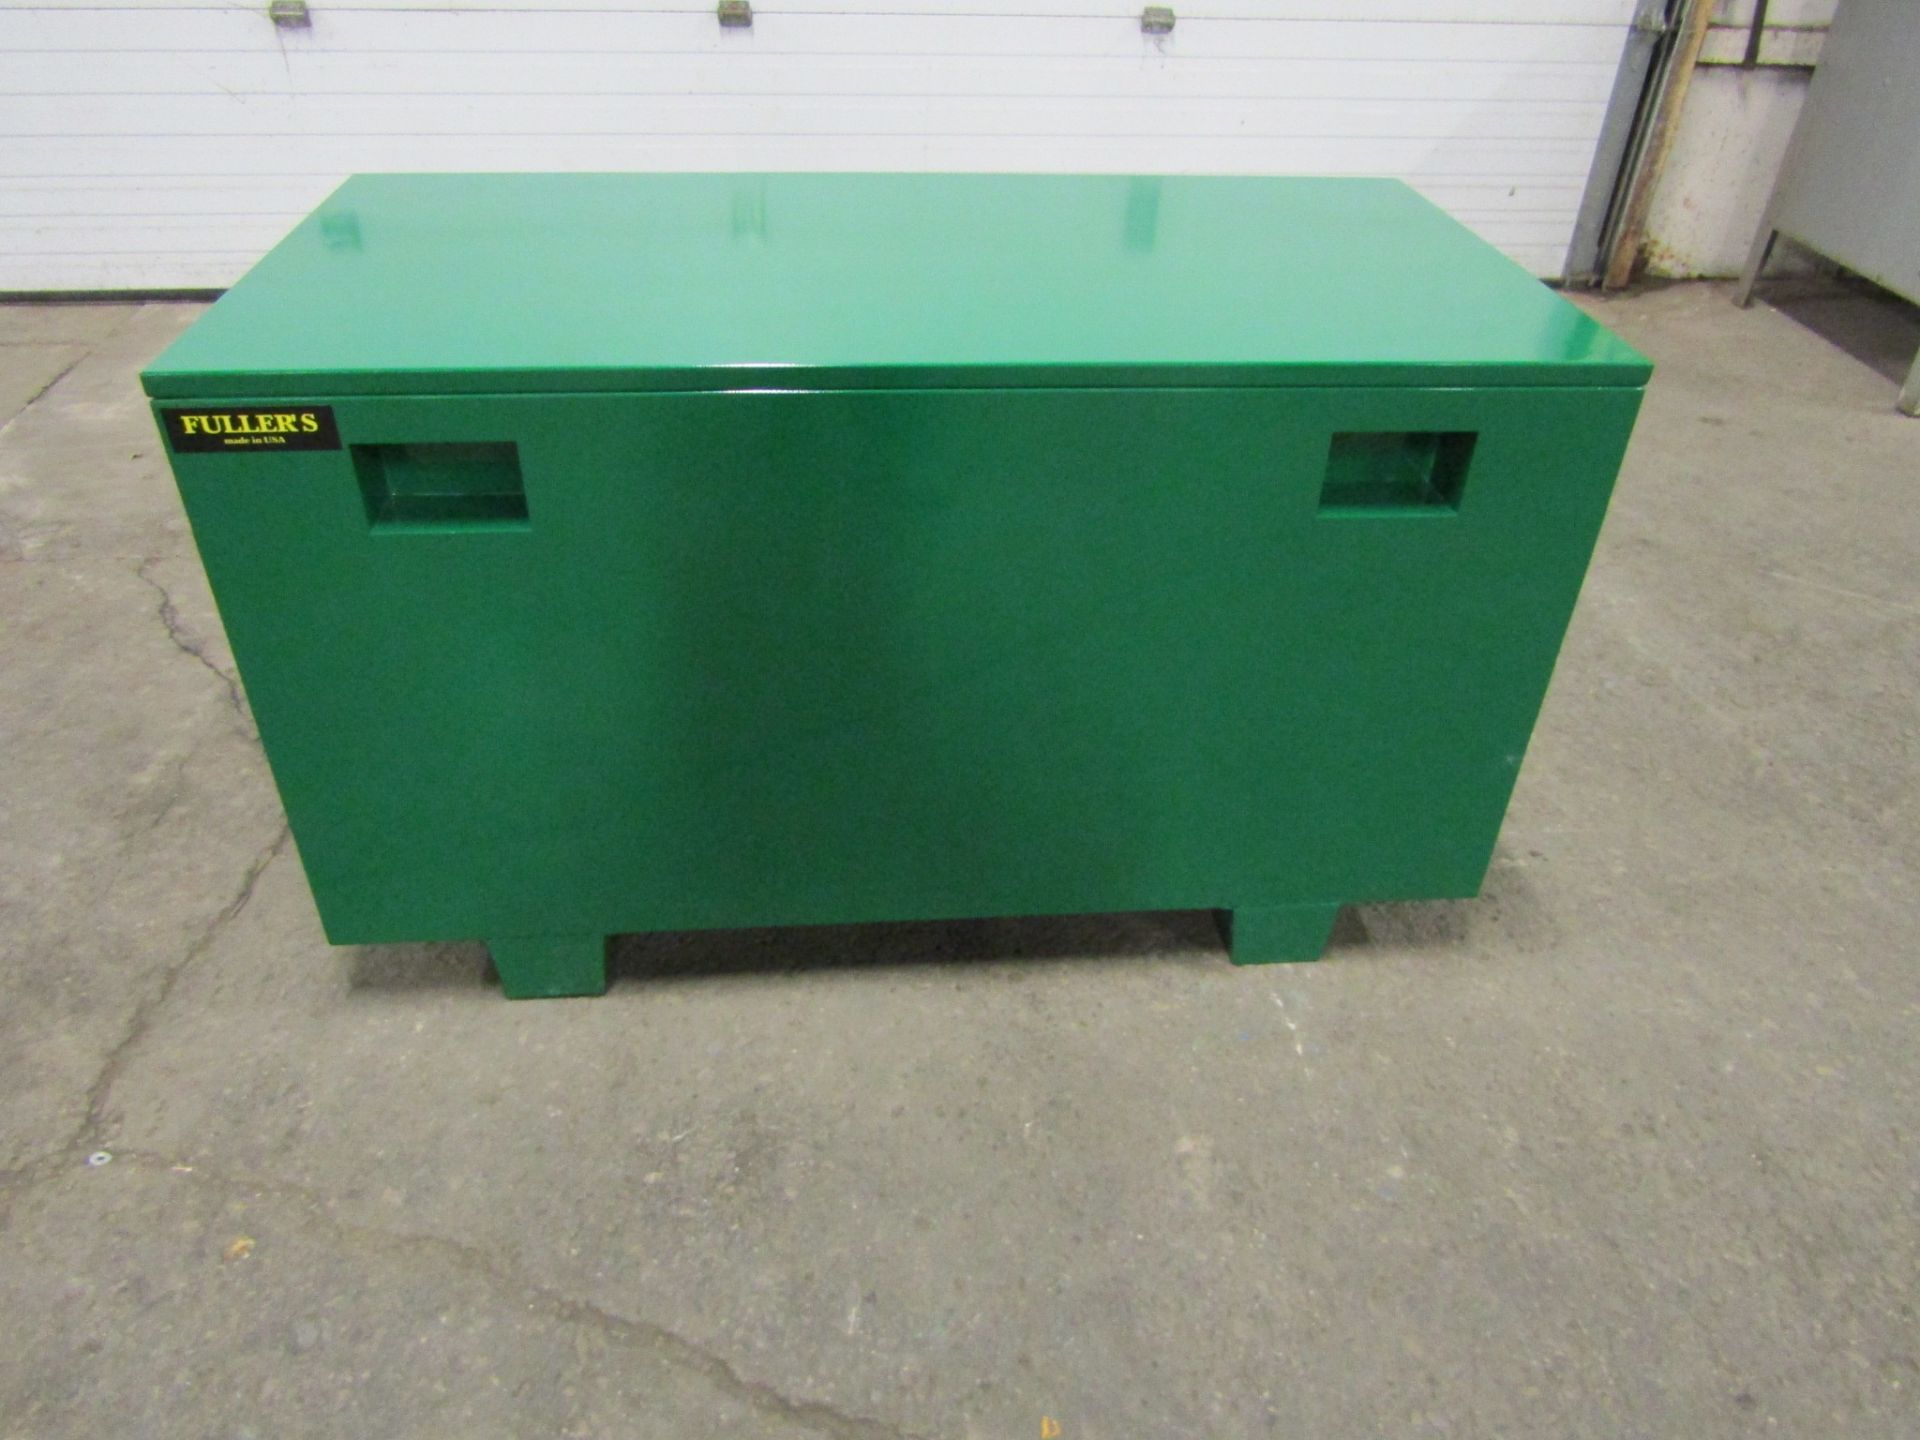 Fullers Worksite Jobbox / Toolbox - MINT new unit - Image 2 of 3